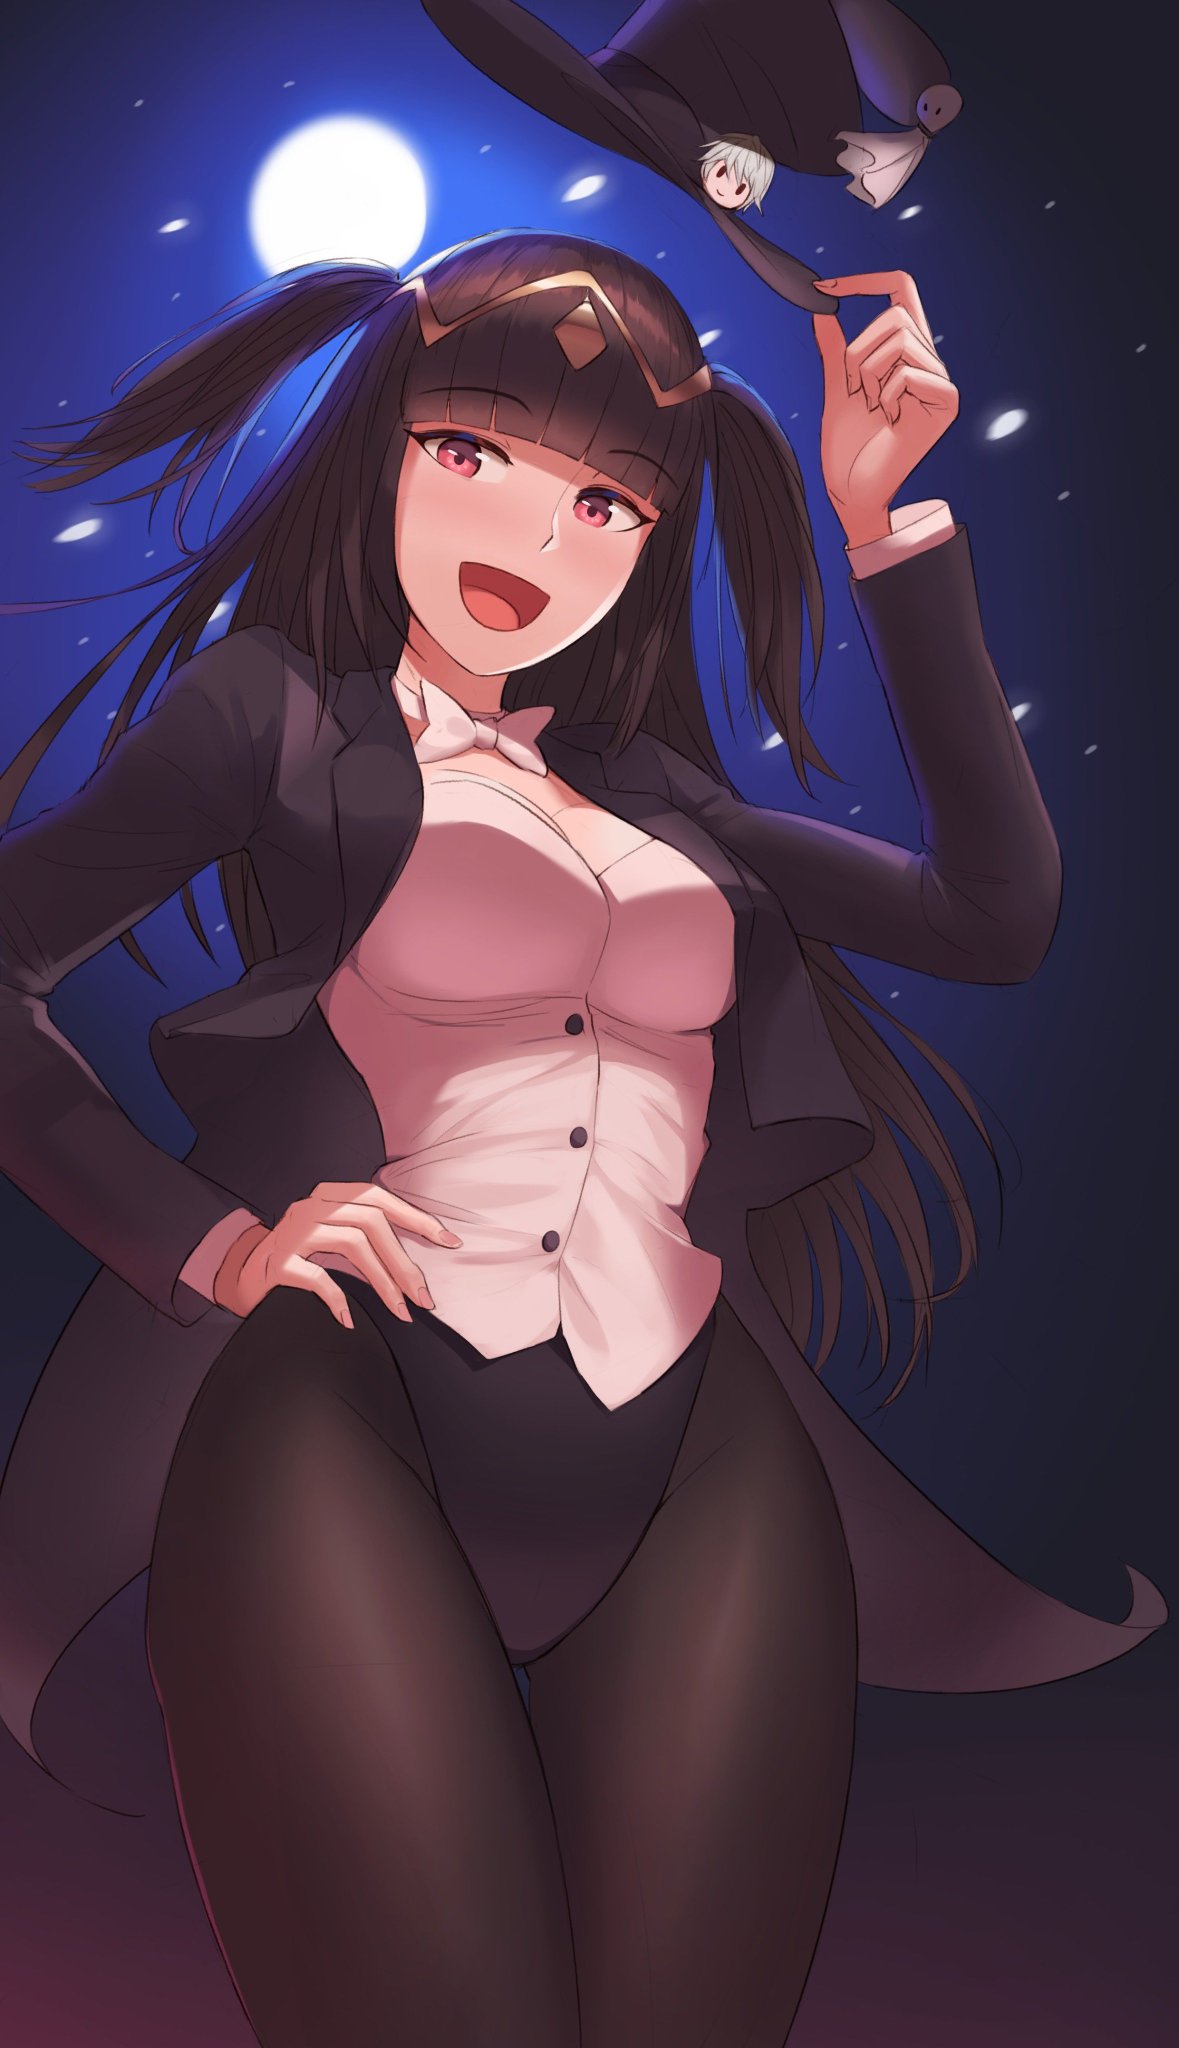 “Finished drawing Tharja in Zatanna's outfit!

#fir...